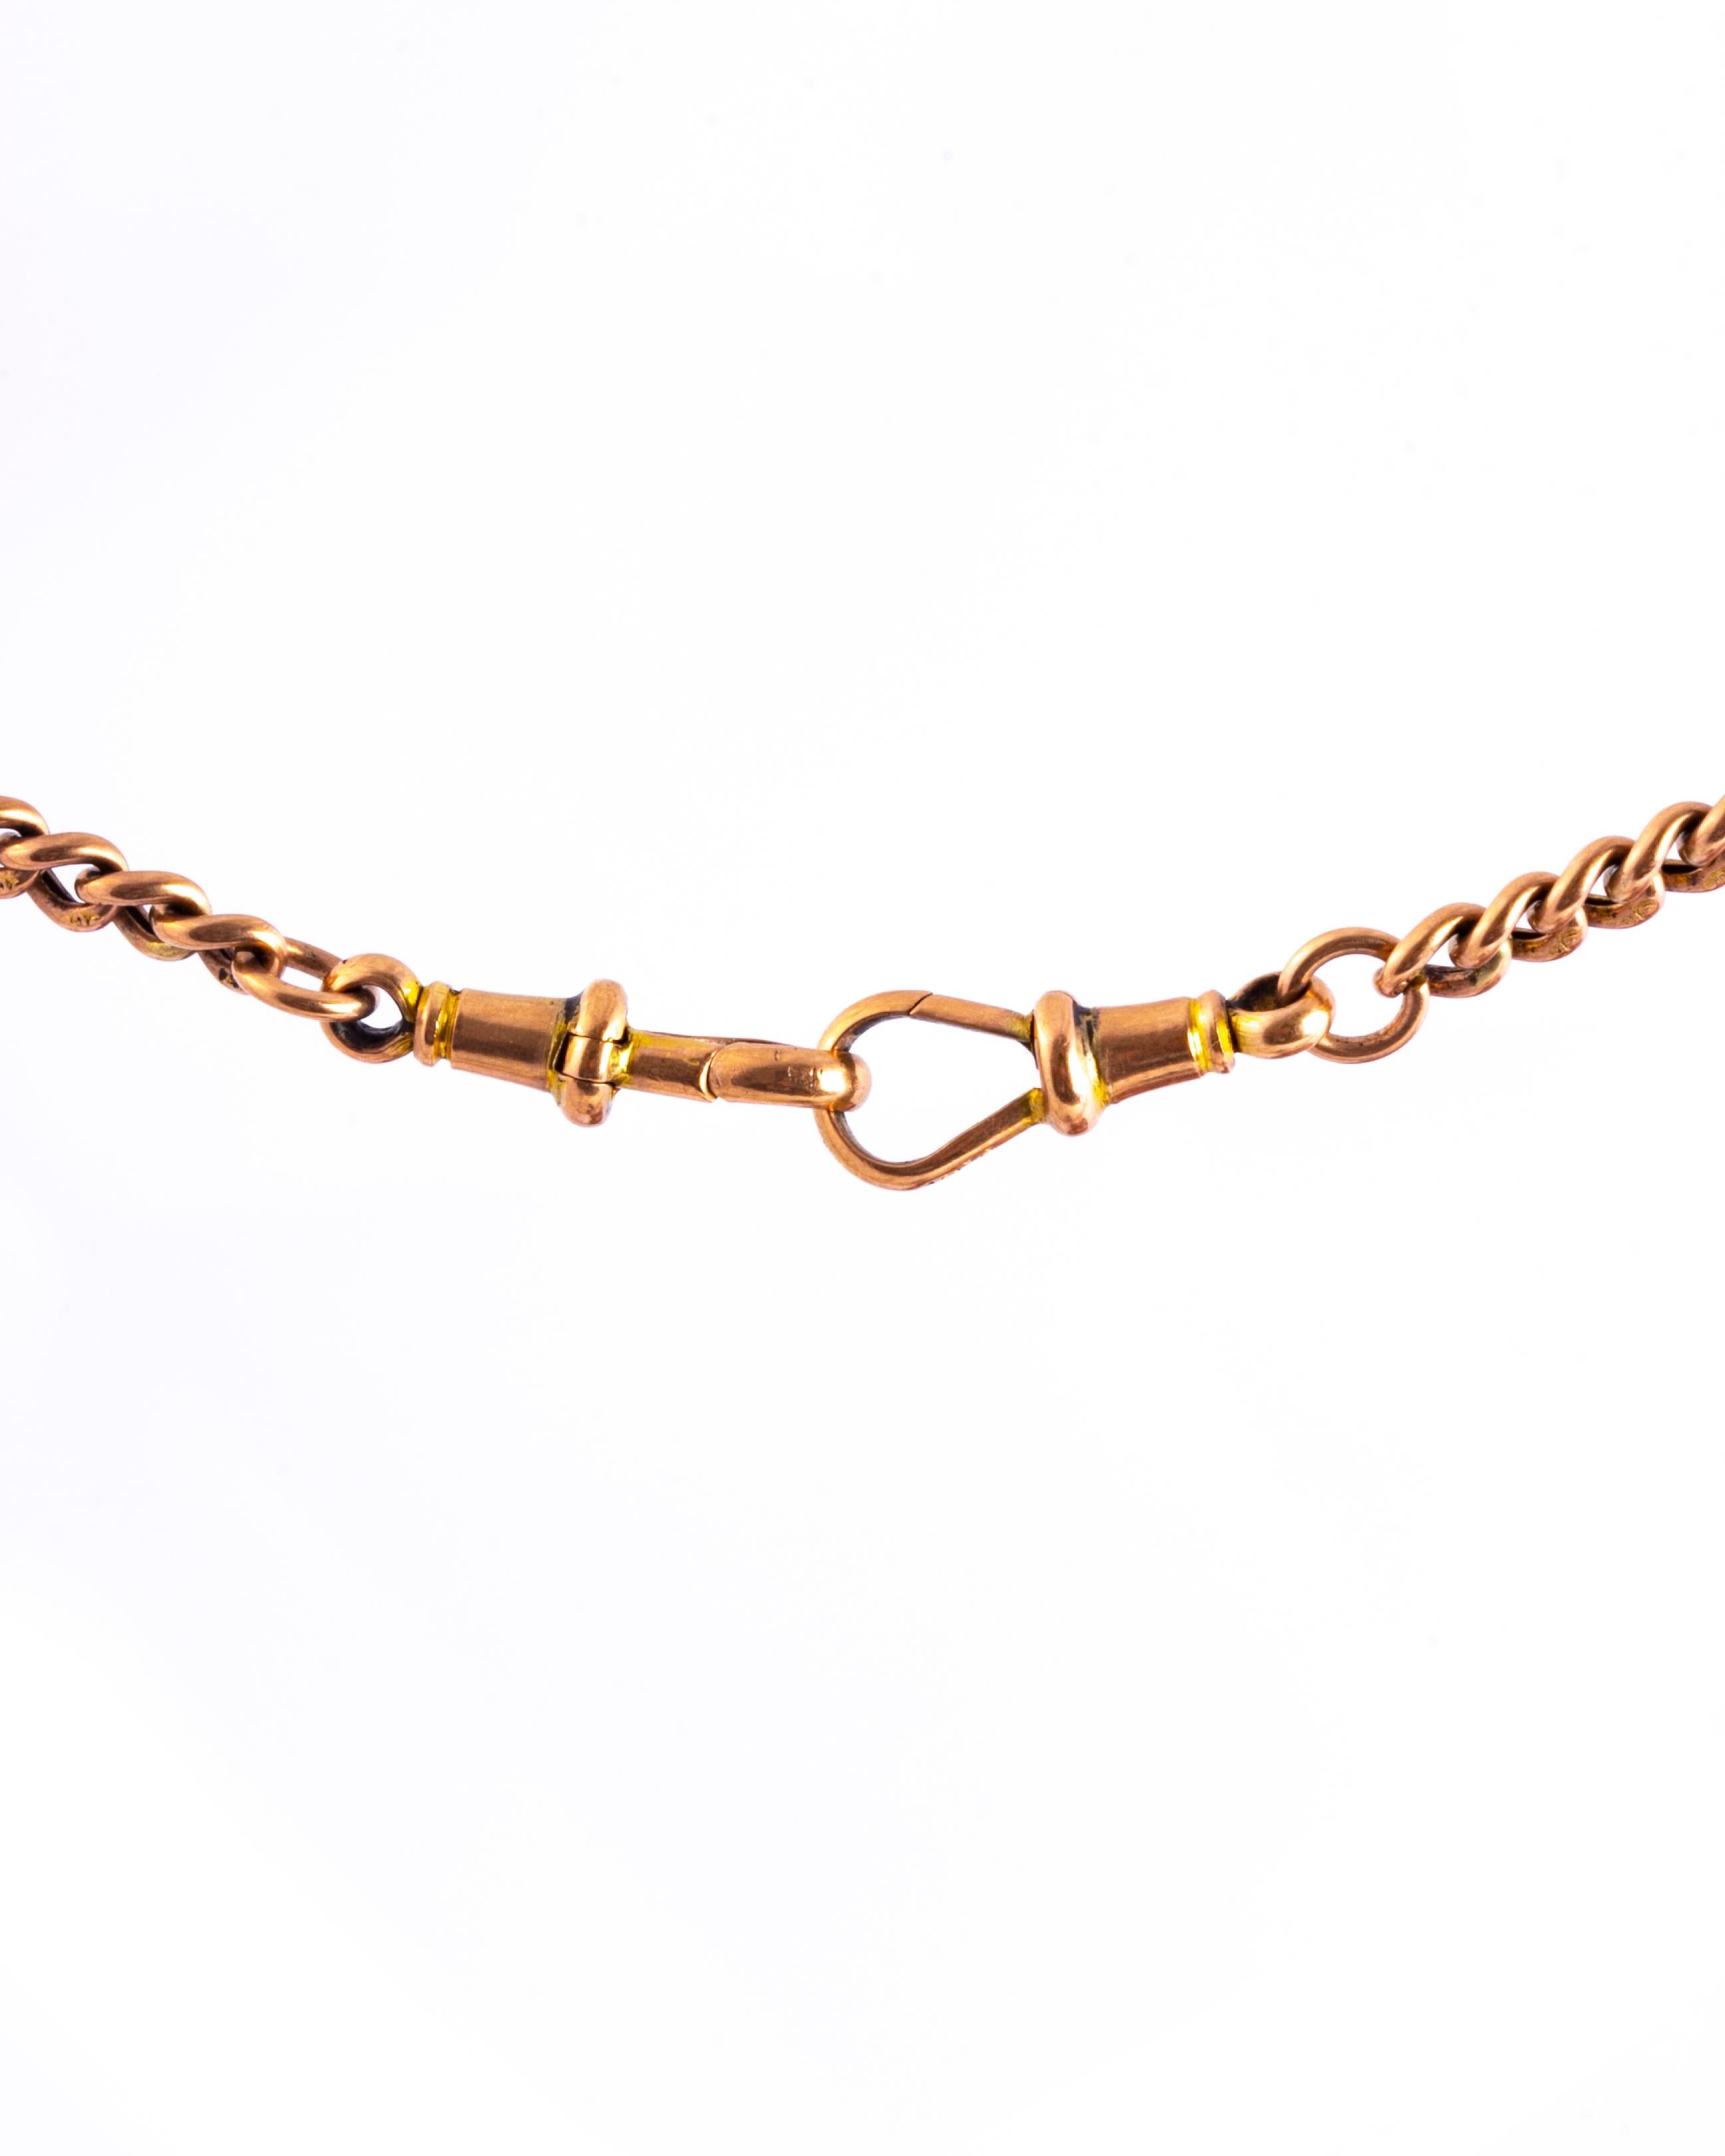 This albertina is the perfect item for a gents wardrobe or could even be used as a necklace. The chain has a dog clip either end and at the centre there is a t-bar. 

Length: 44.5cm
Chain Width: 4mm 

Weight: 16g
